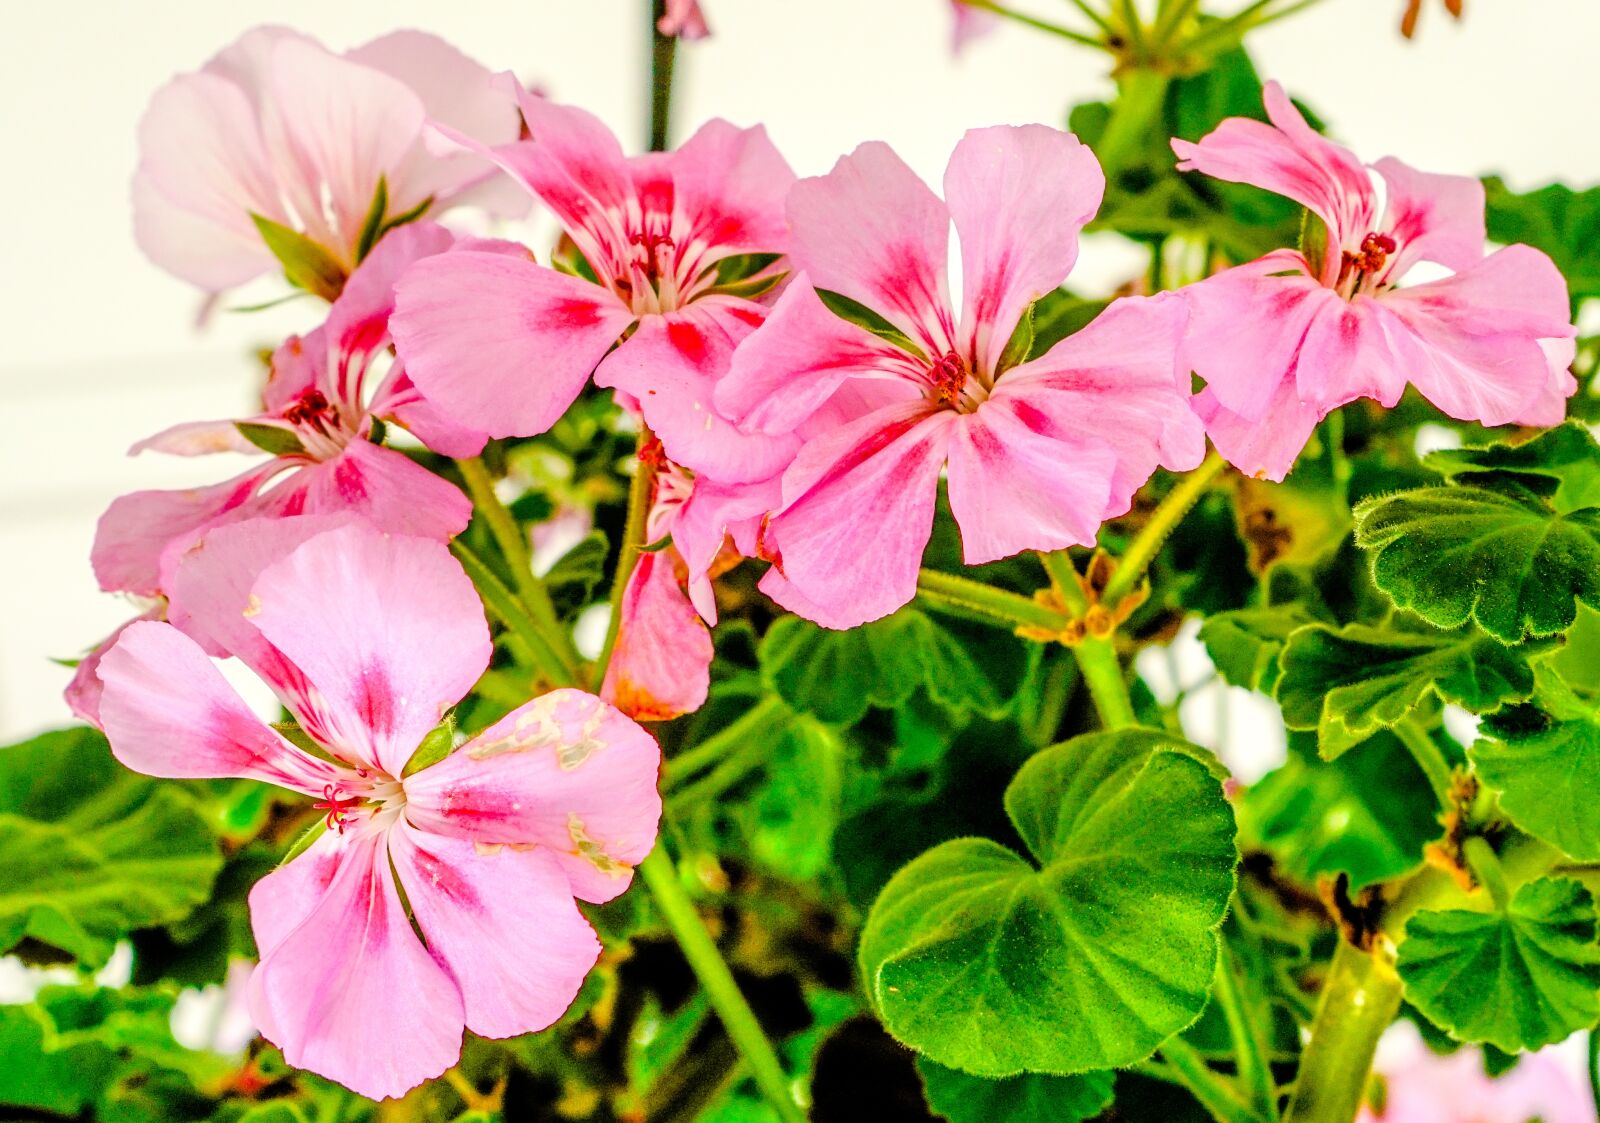 Sony a6300 sample photo. Flowers, pink, leaves photography